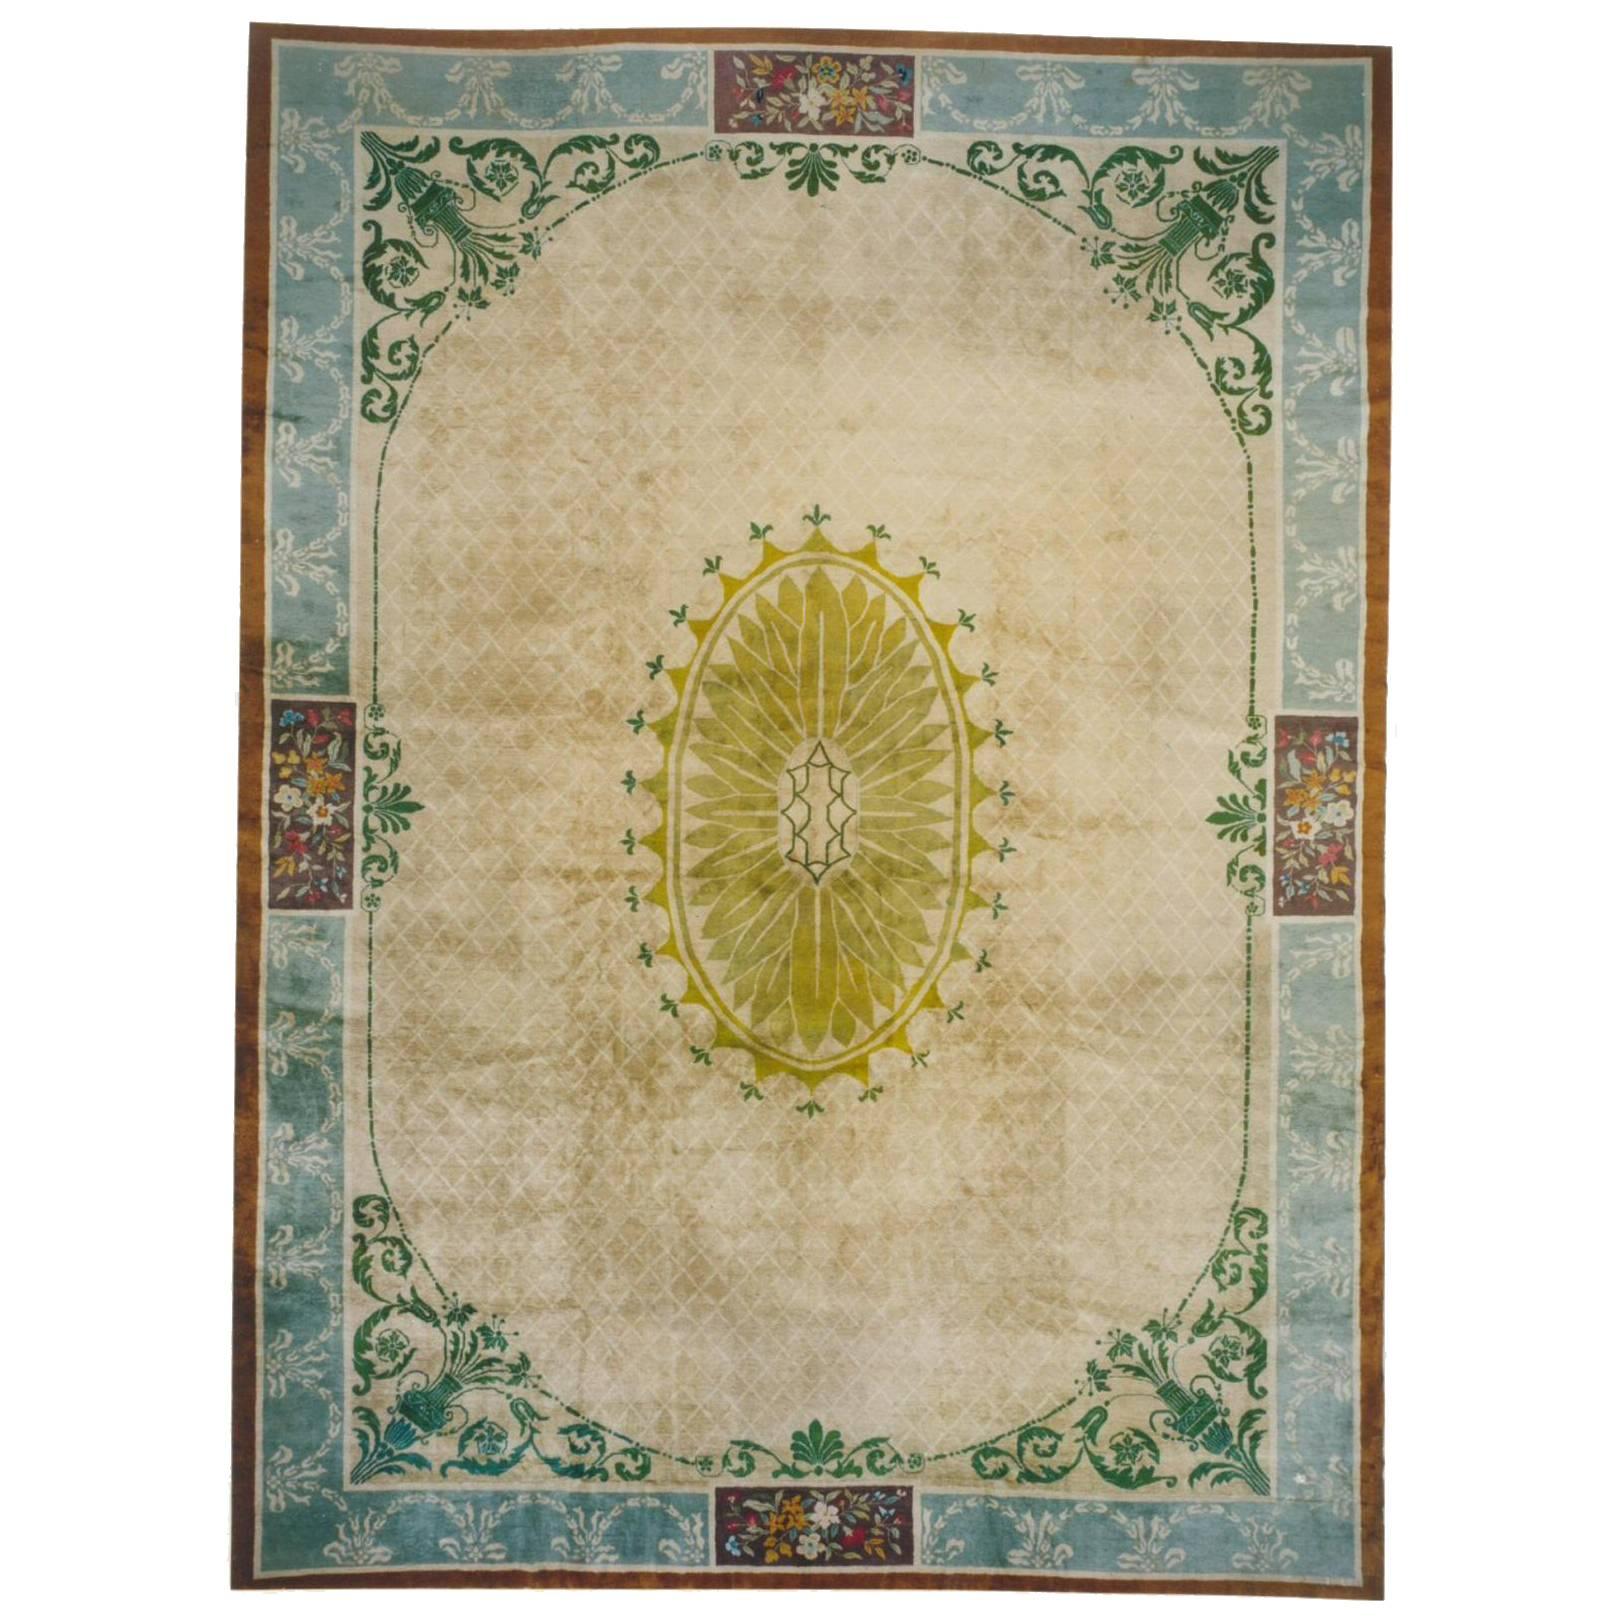 Chinese Art Deco Rug Influenced by 18th Century European Architecture